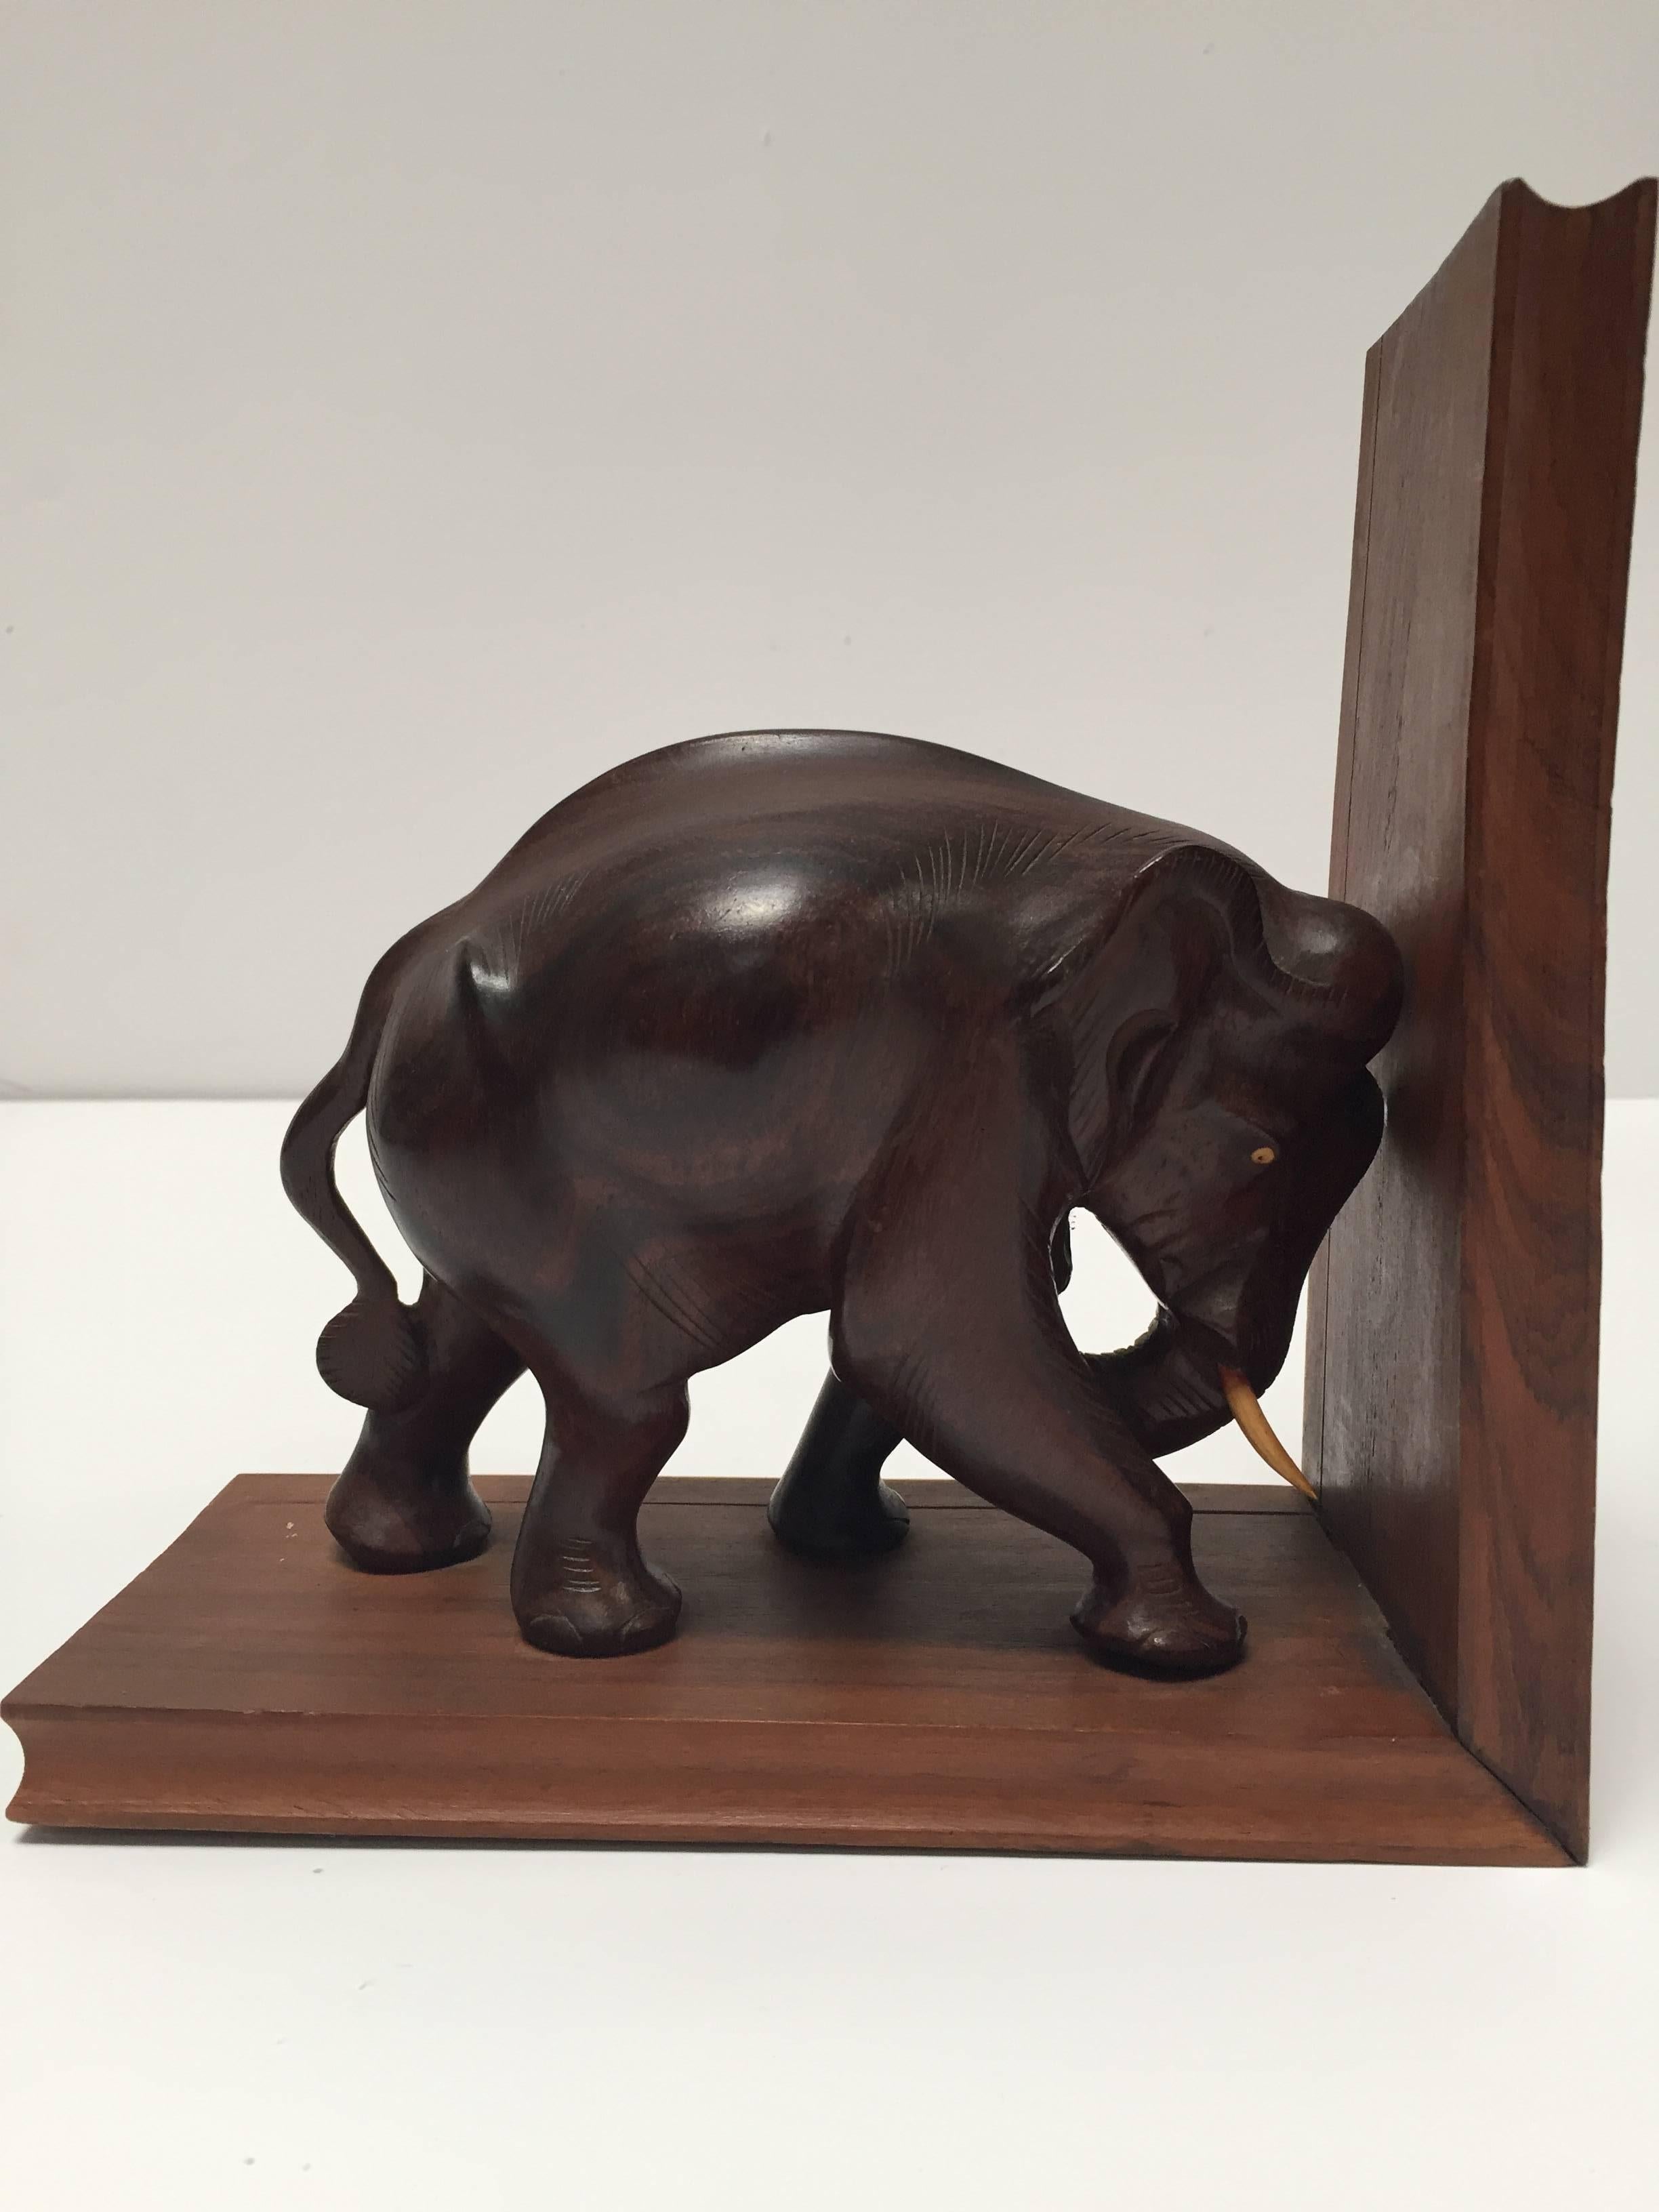 Nice pair of hand-carved wooden elephant bookends. 
One of the elephant is missing his tusks.
These are hand-carved and therefore not completely identical, 
circa 1950
Size for each piece is 8.25 in H. x 8.25 in W. x 4in D.